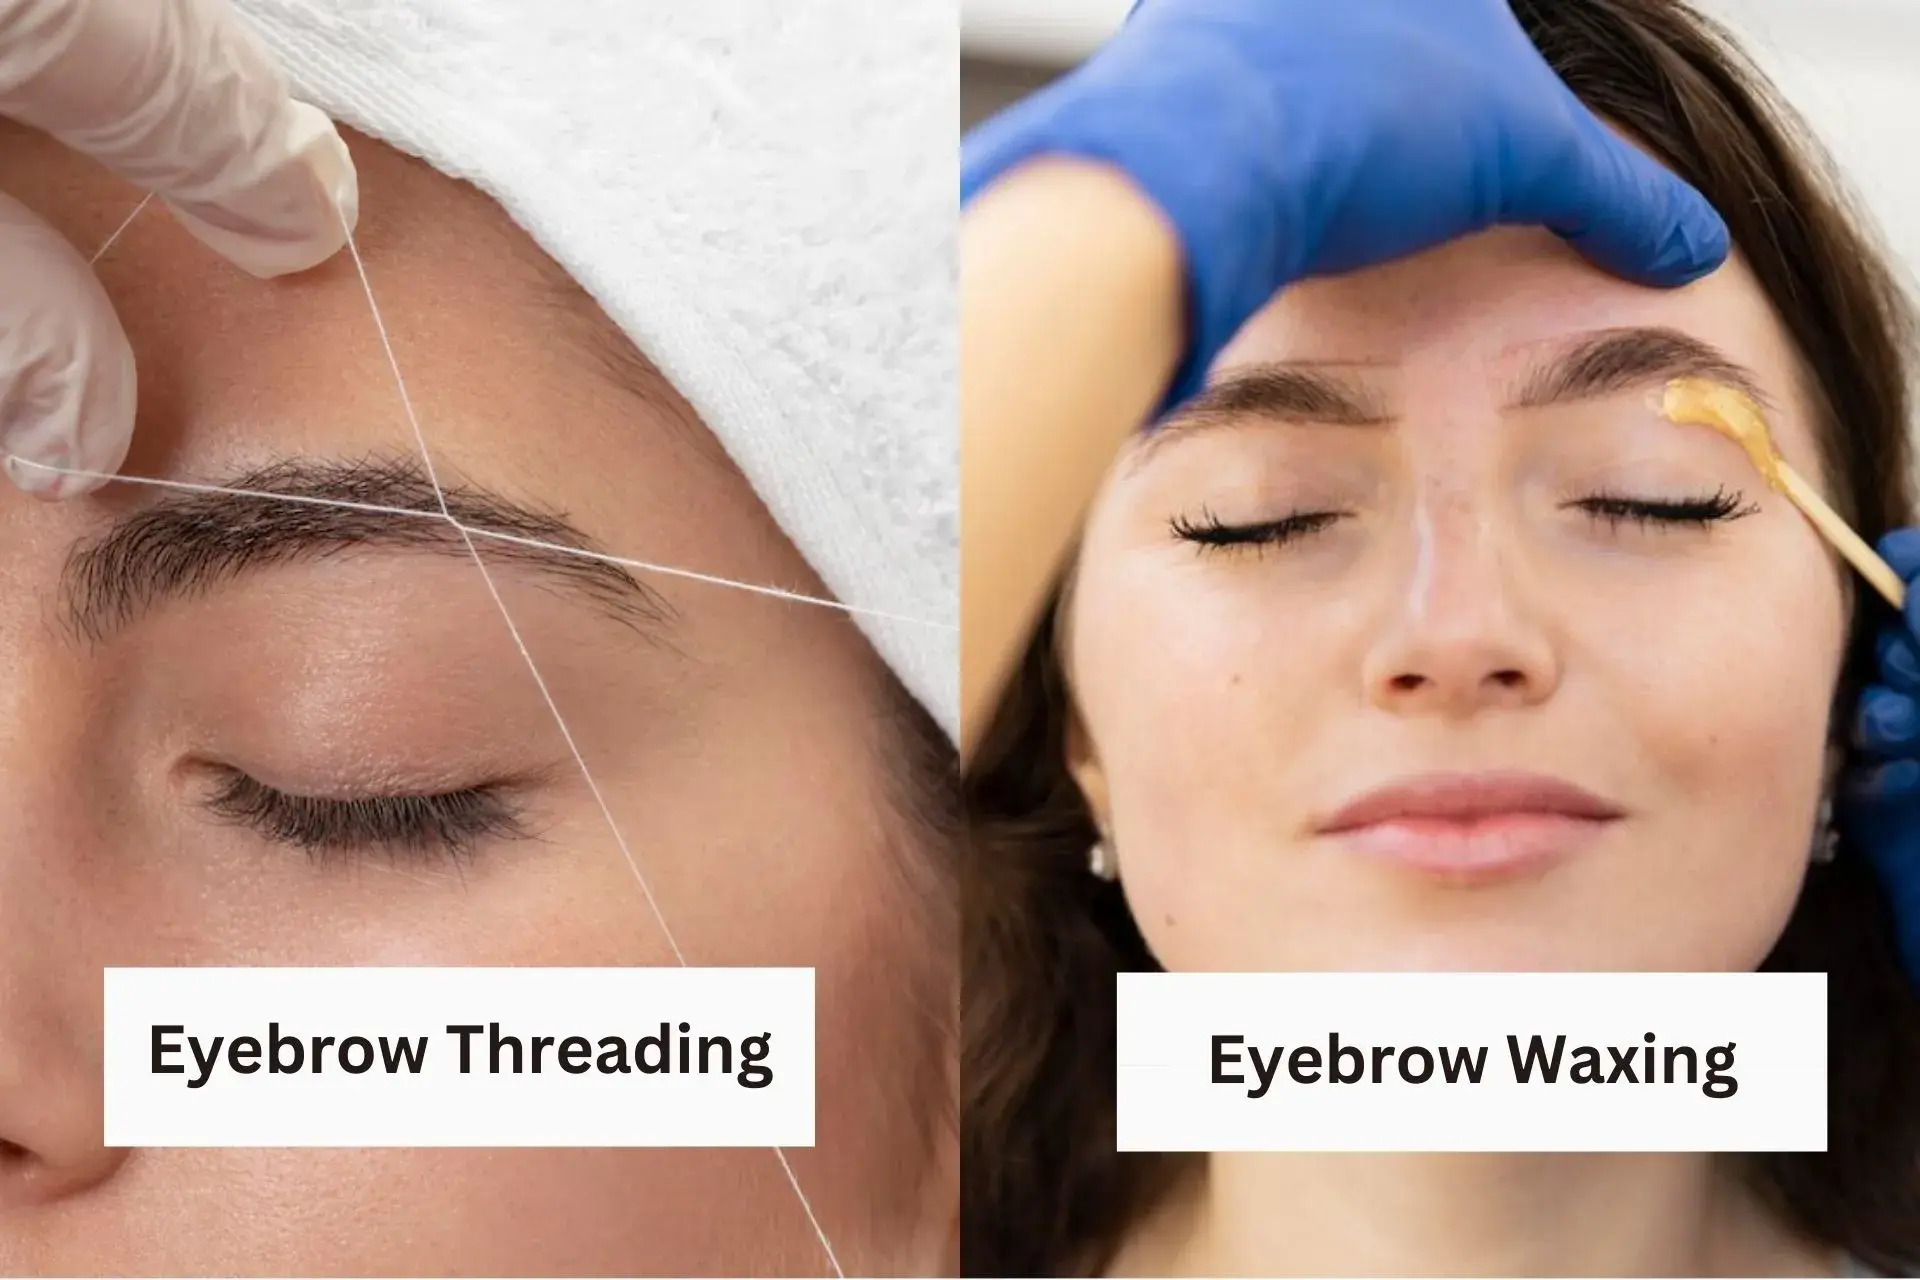 Eyebrow Threading vs. Eyebrow Waxing – Which is Right for You?